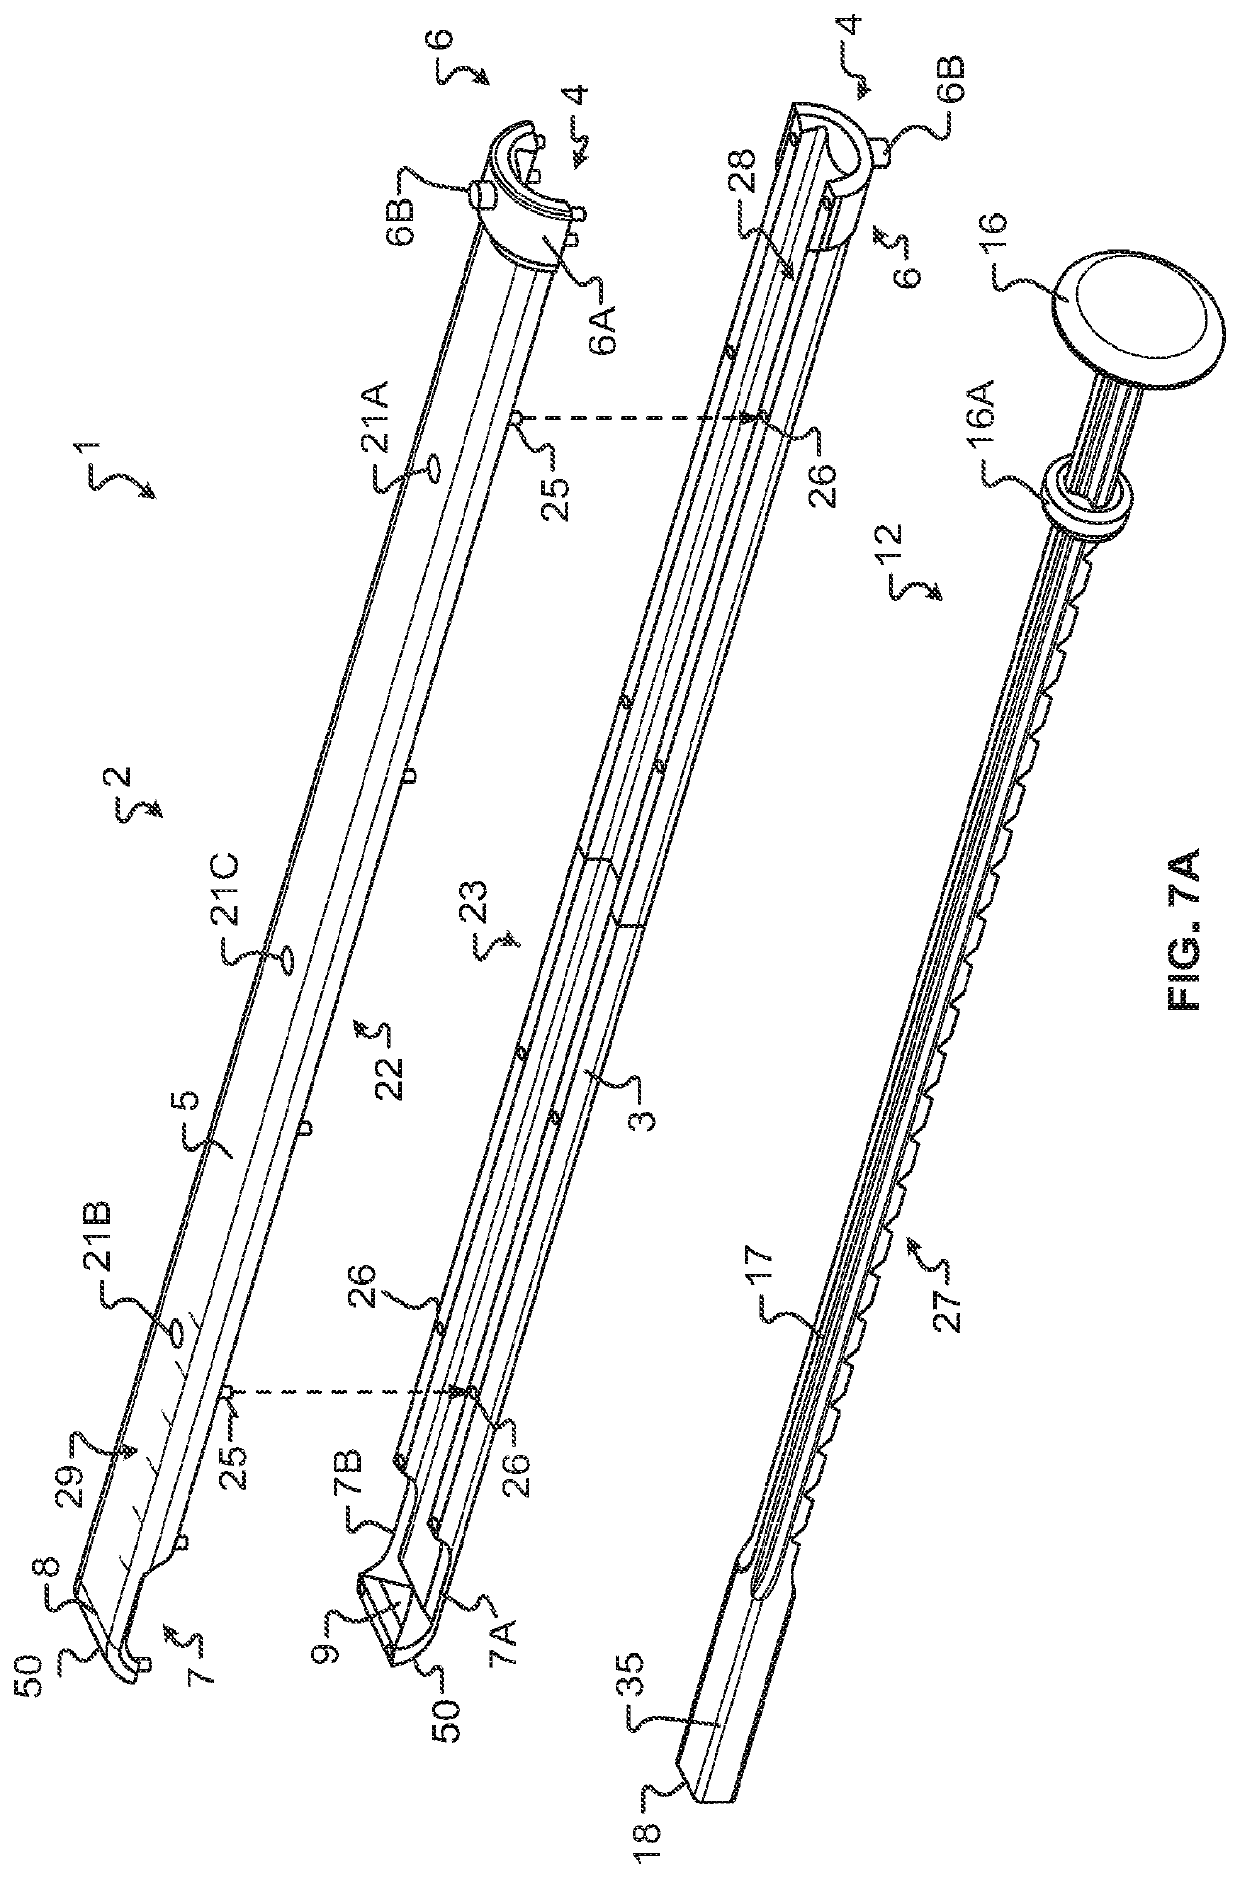 Bone graft delivery system and method for using same